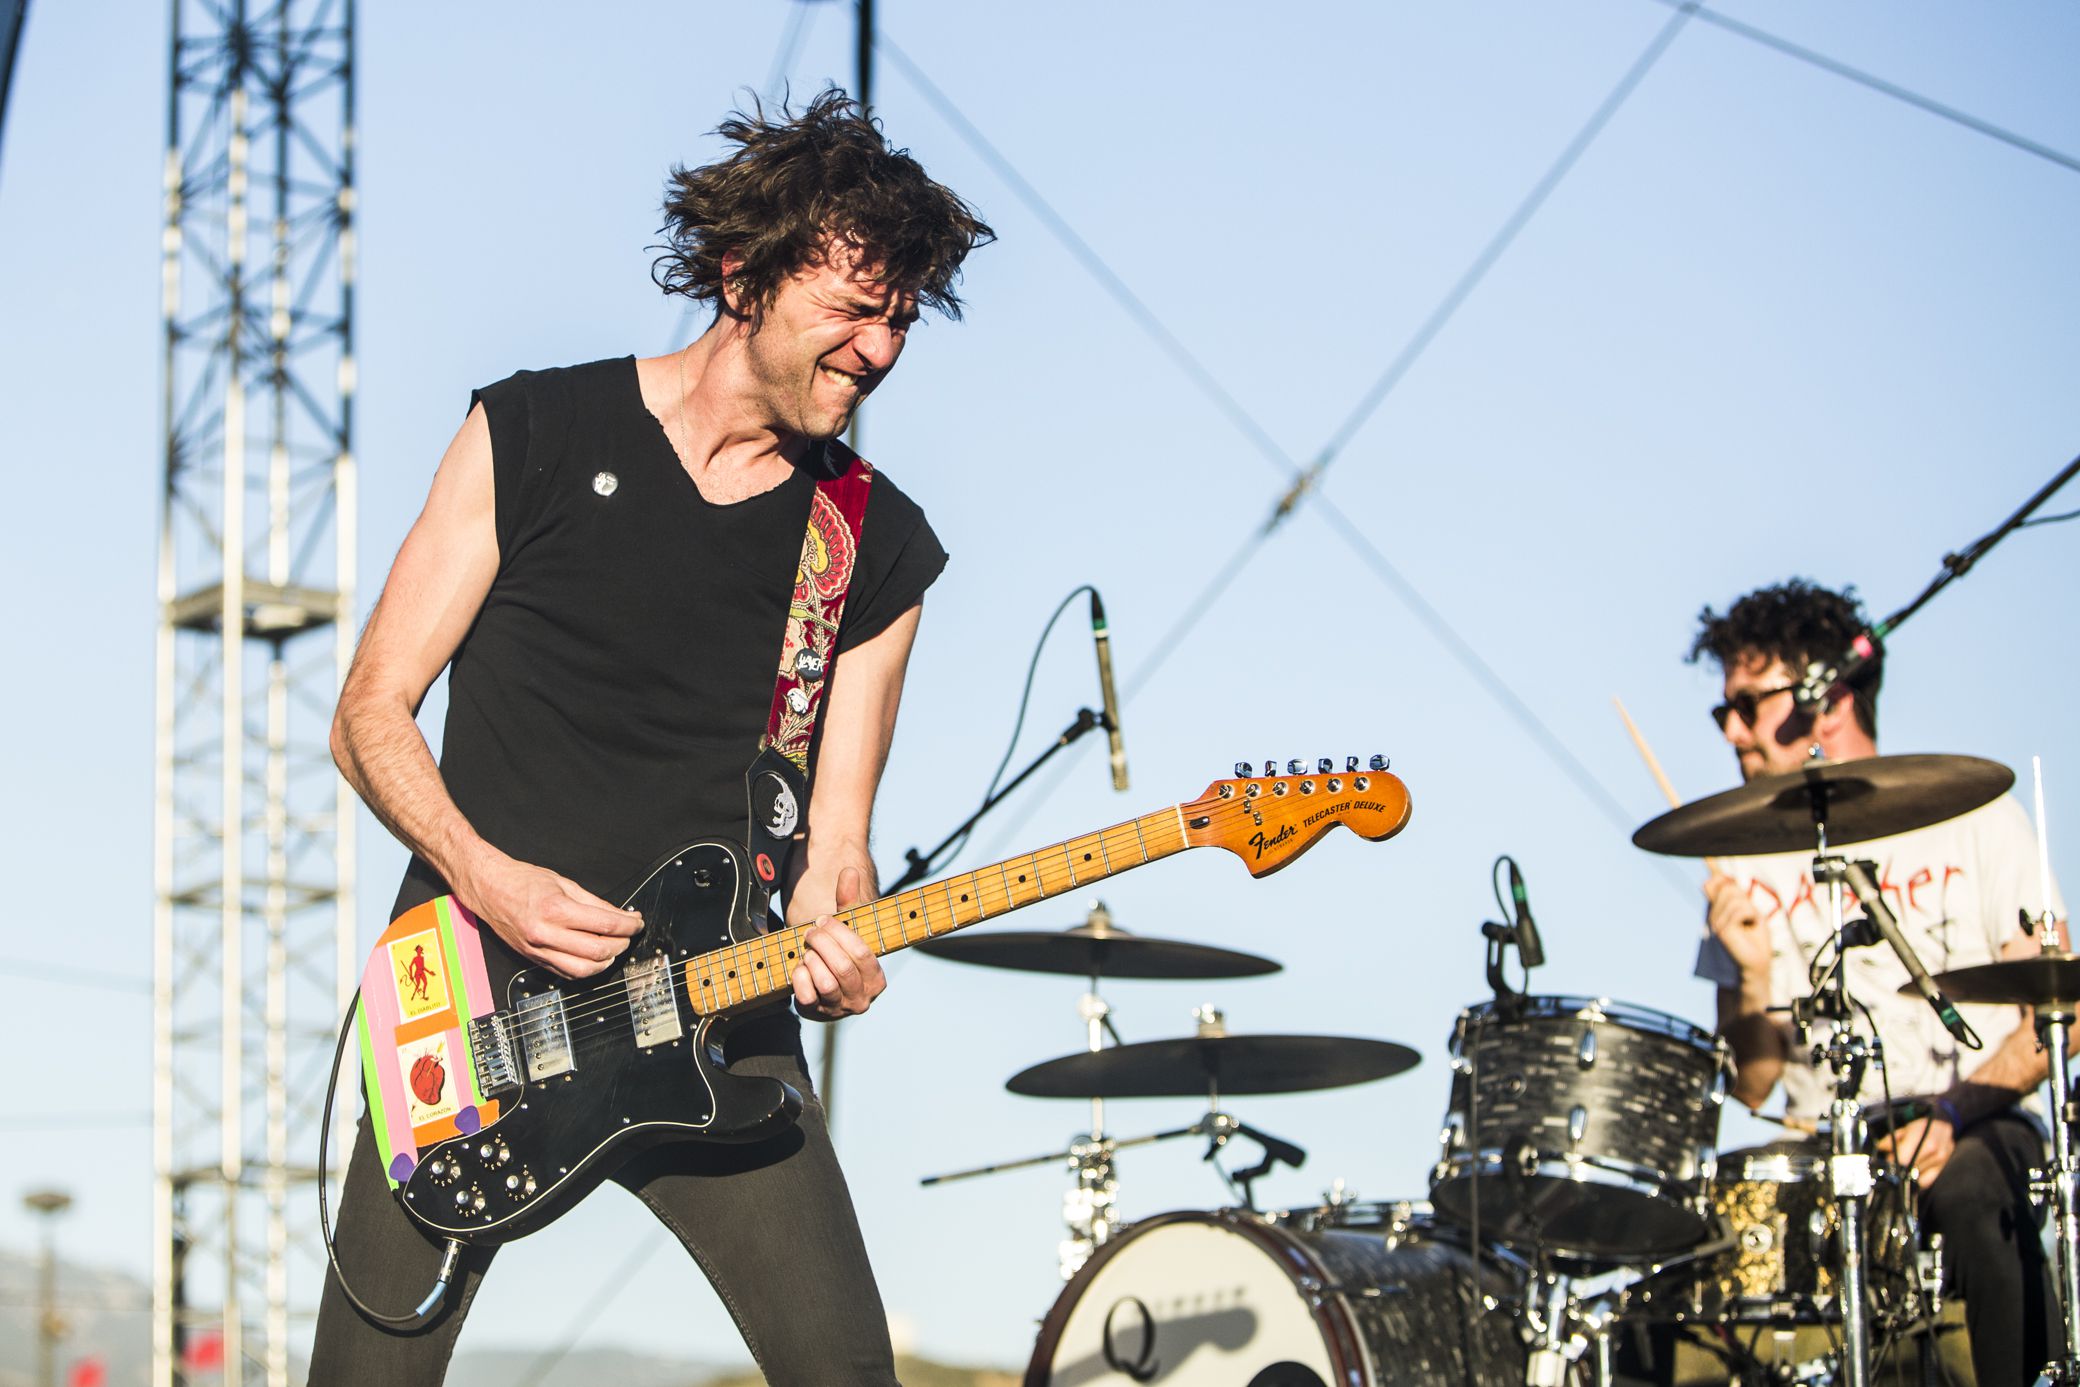 japandroids 4 Cal Jam Offered Everything Youd Want From Dave Grohl